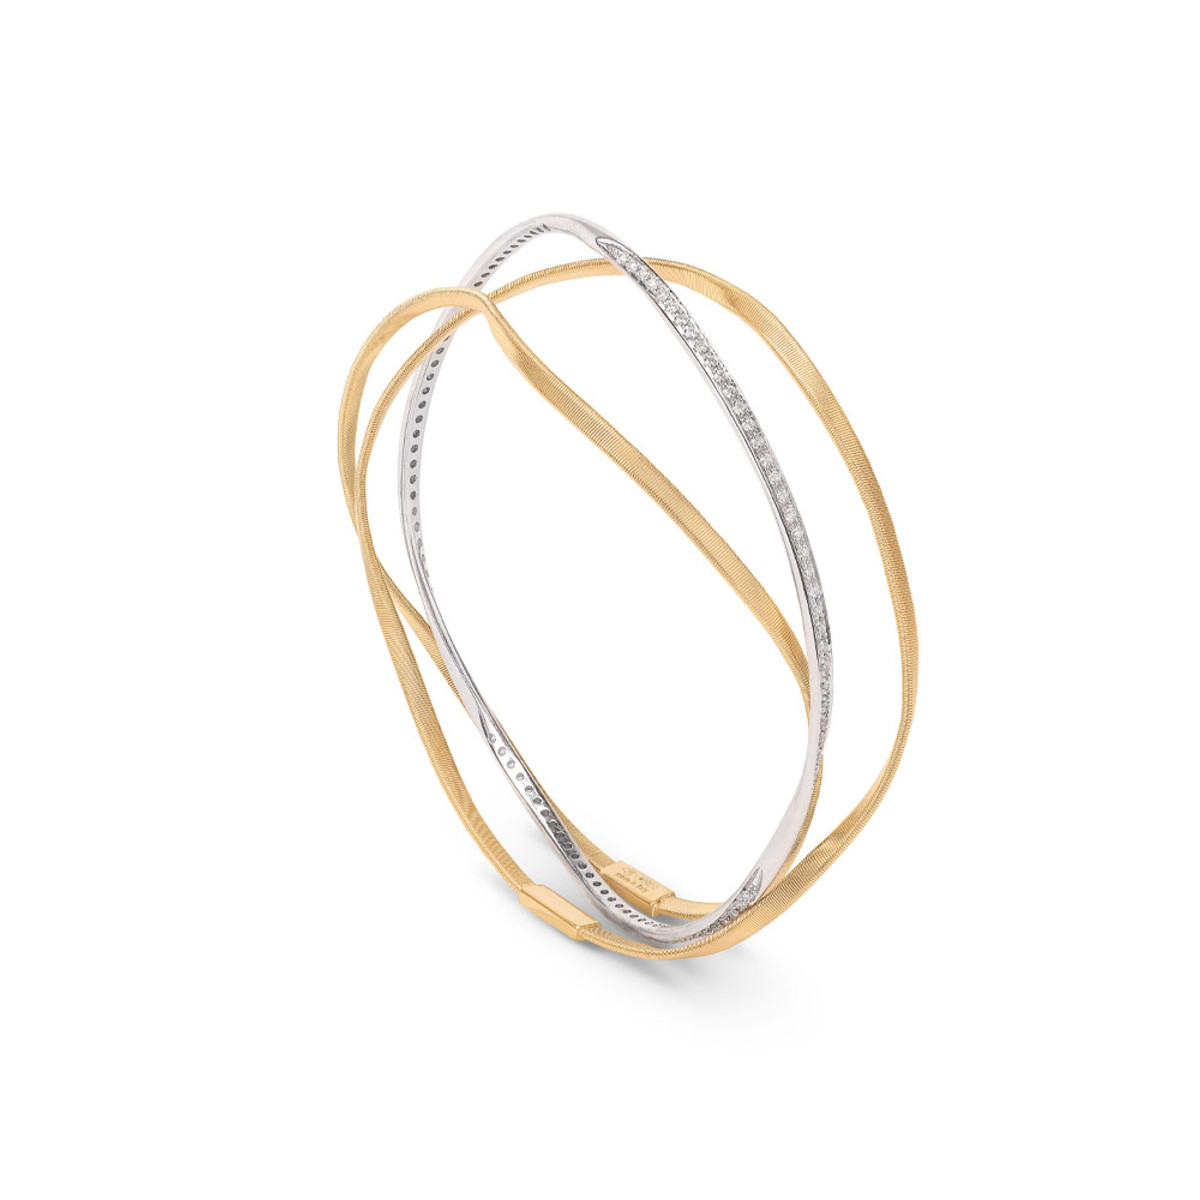 Marco Bicego Marrakech Collection 18K Yellow Gold 3 Row Diamond Hand Twisted Bangle-54253 Product Image